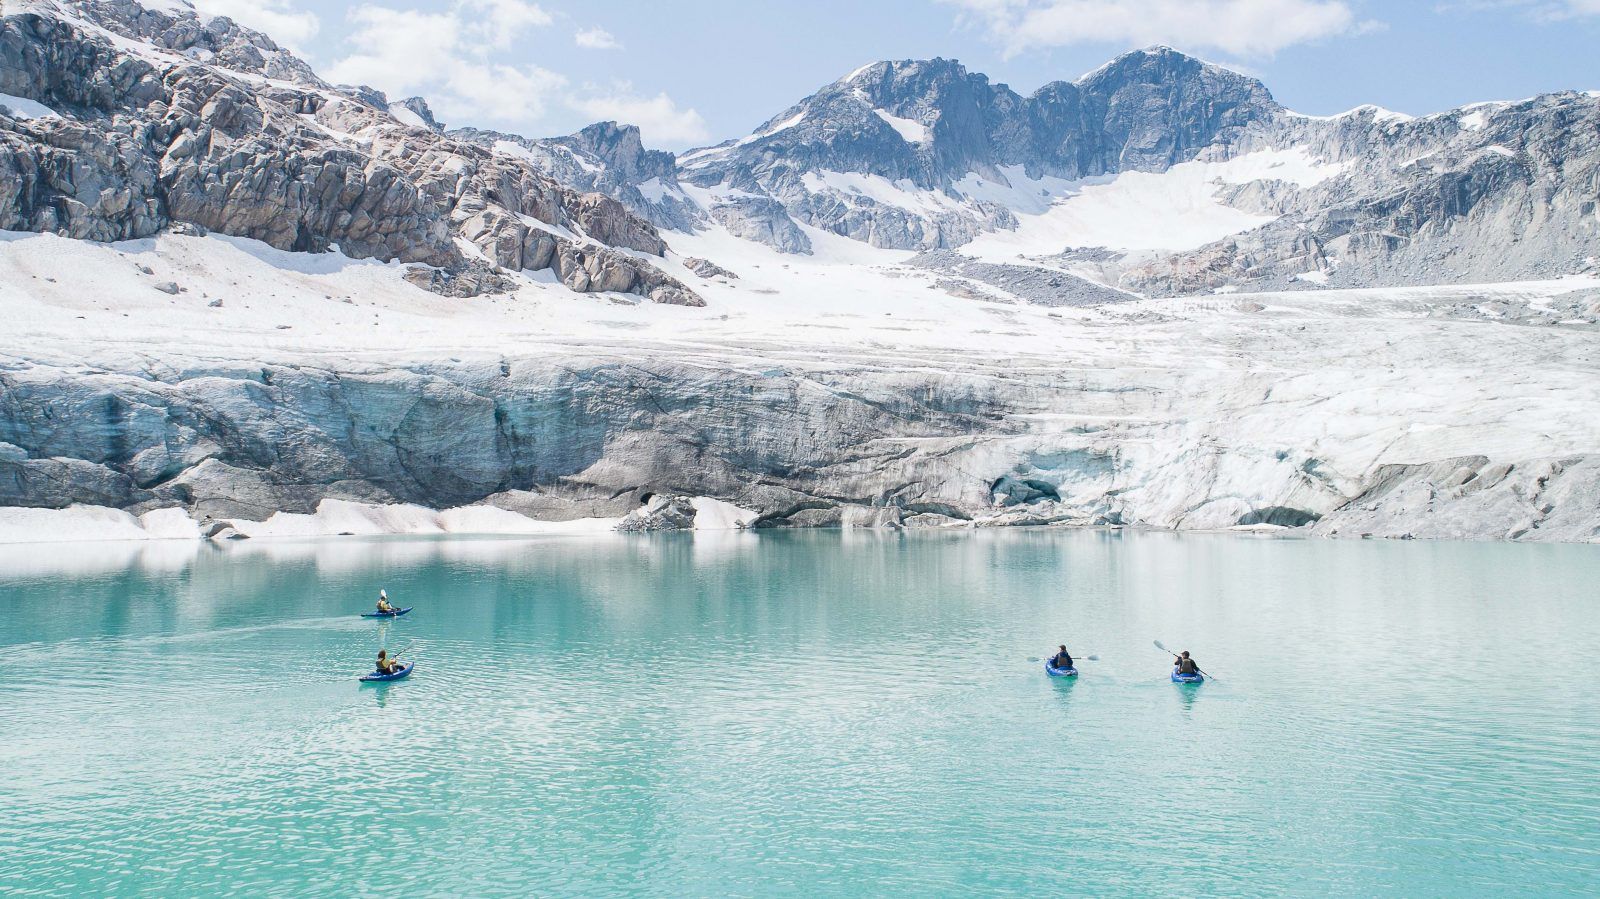 An 100km Kayaking Expedition in Greenland, with paddlers looking on to the grand environment.